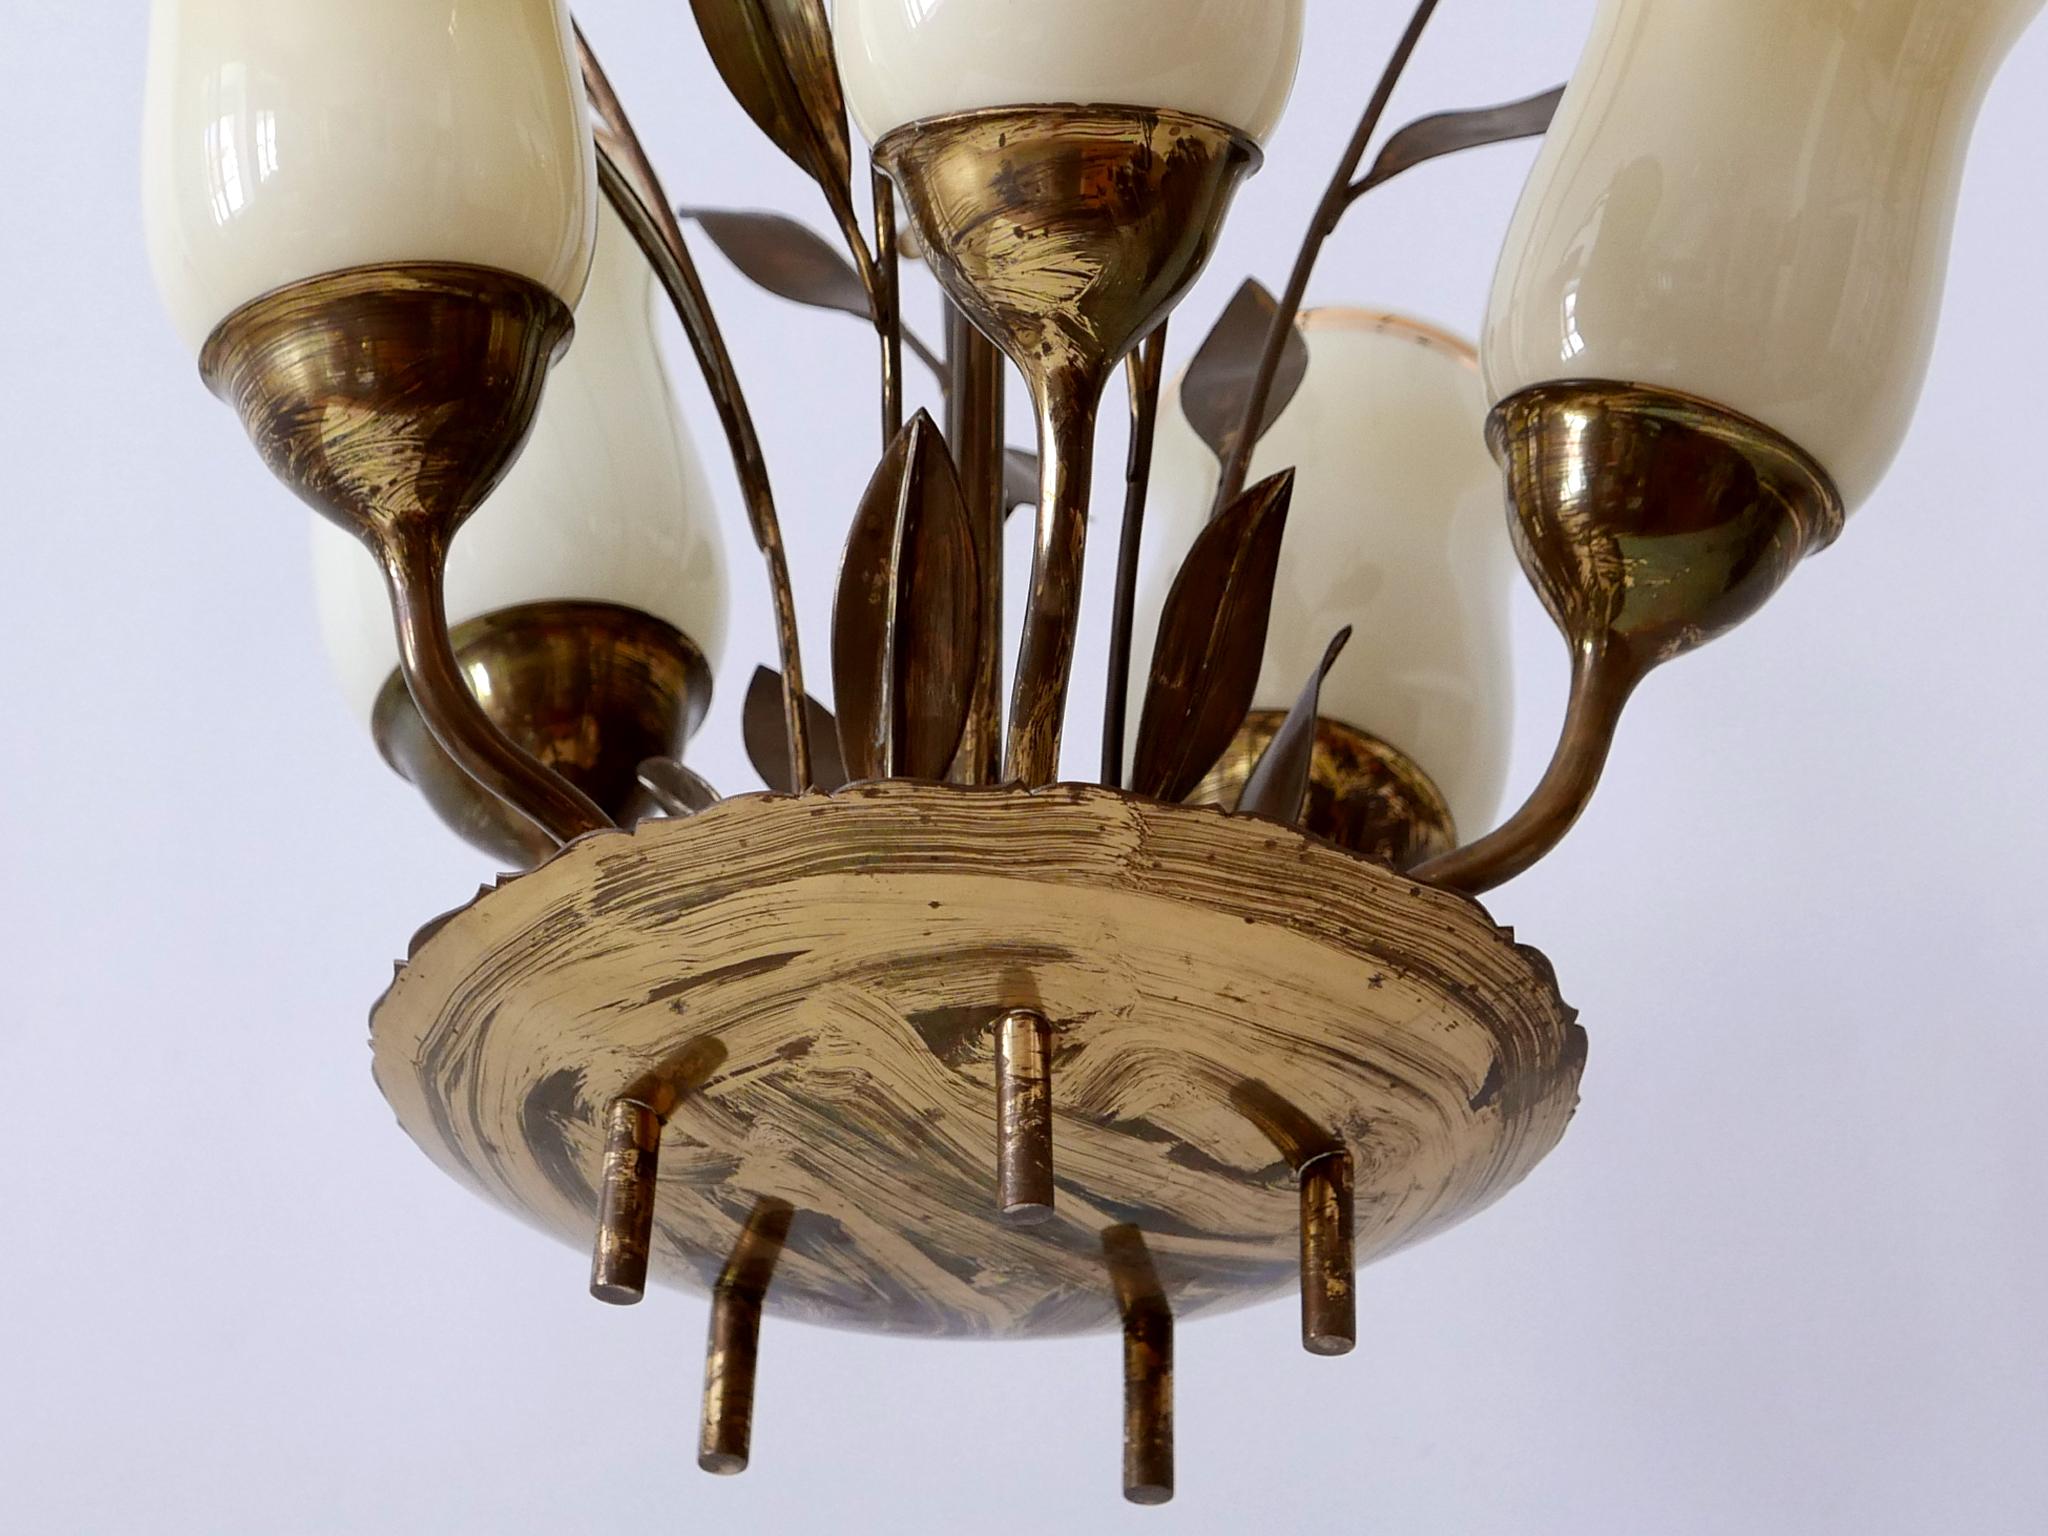 Exceptional Scandinavian Brass & Opal Glass Chandelier or Ceiling Lamp, 1950s For Sale 6